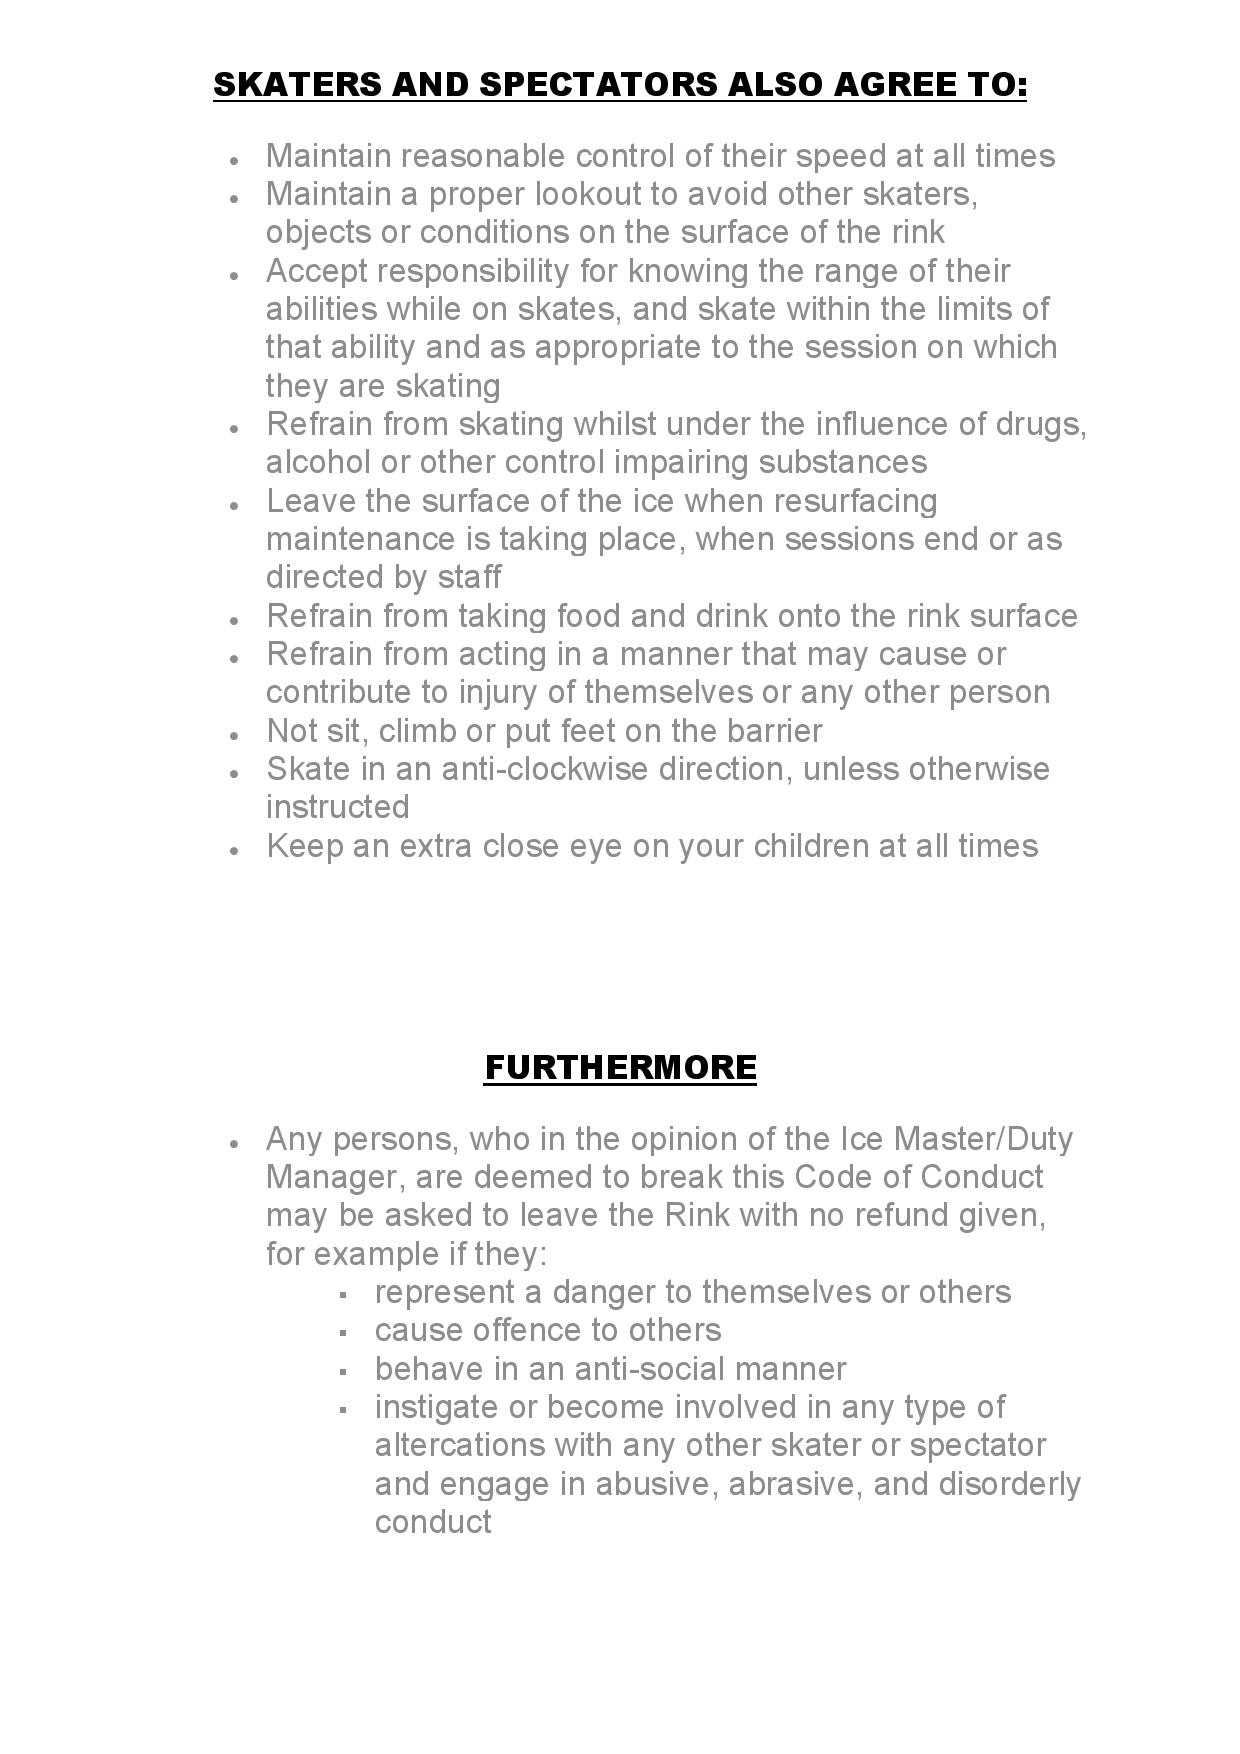 SKATER CODE OF CONDUCT Page 2